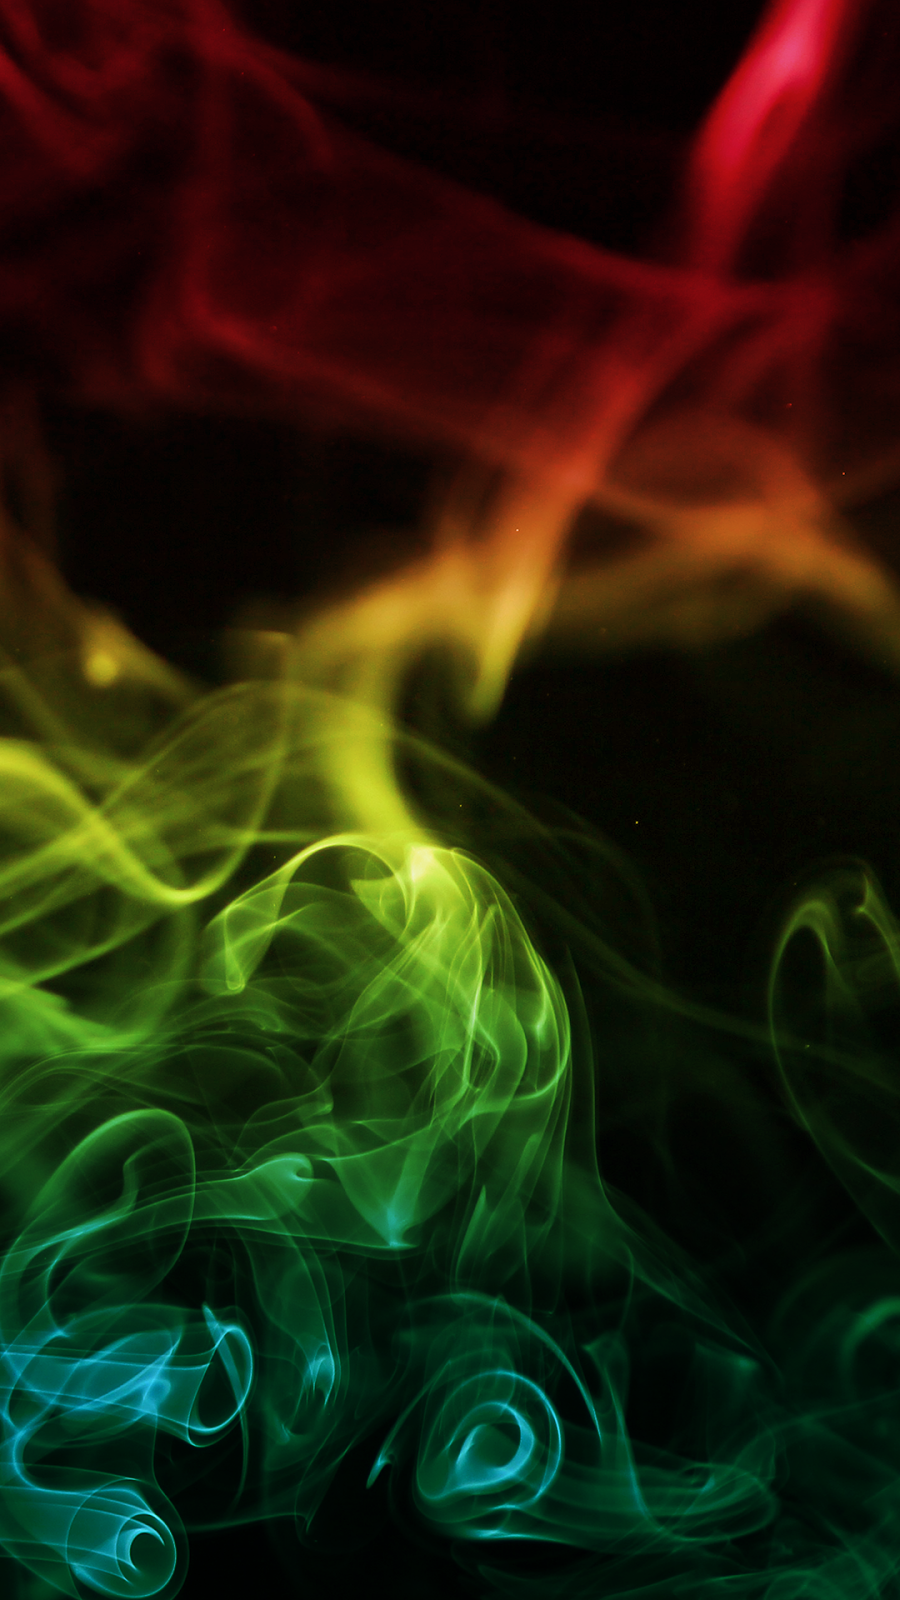 Smoke HD Wallpaper For Mobile - Wallpapers For Mobile Phones